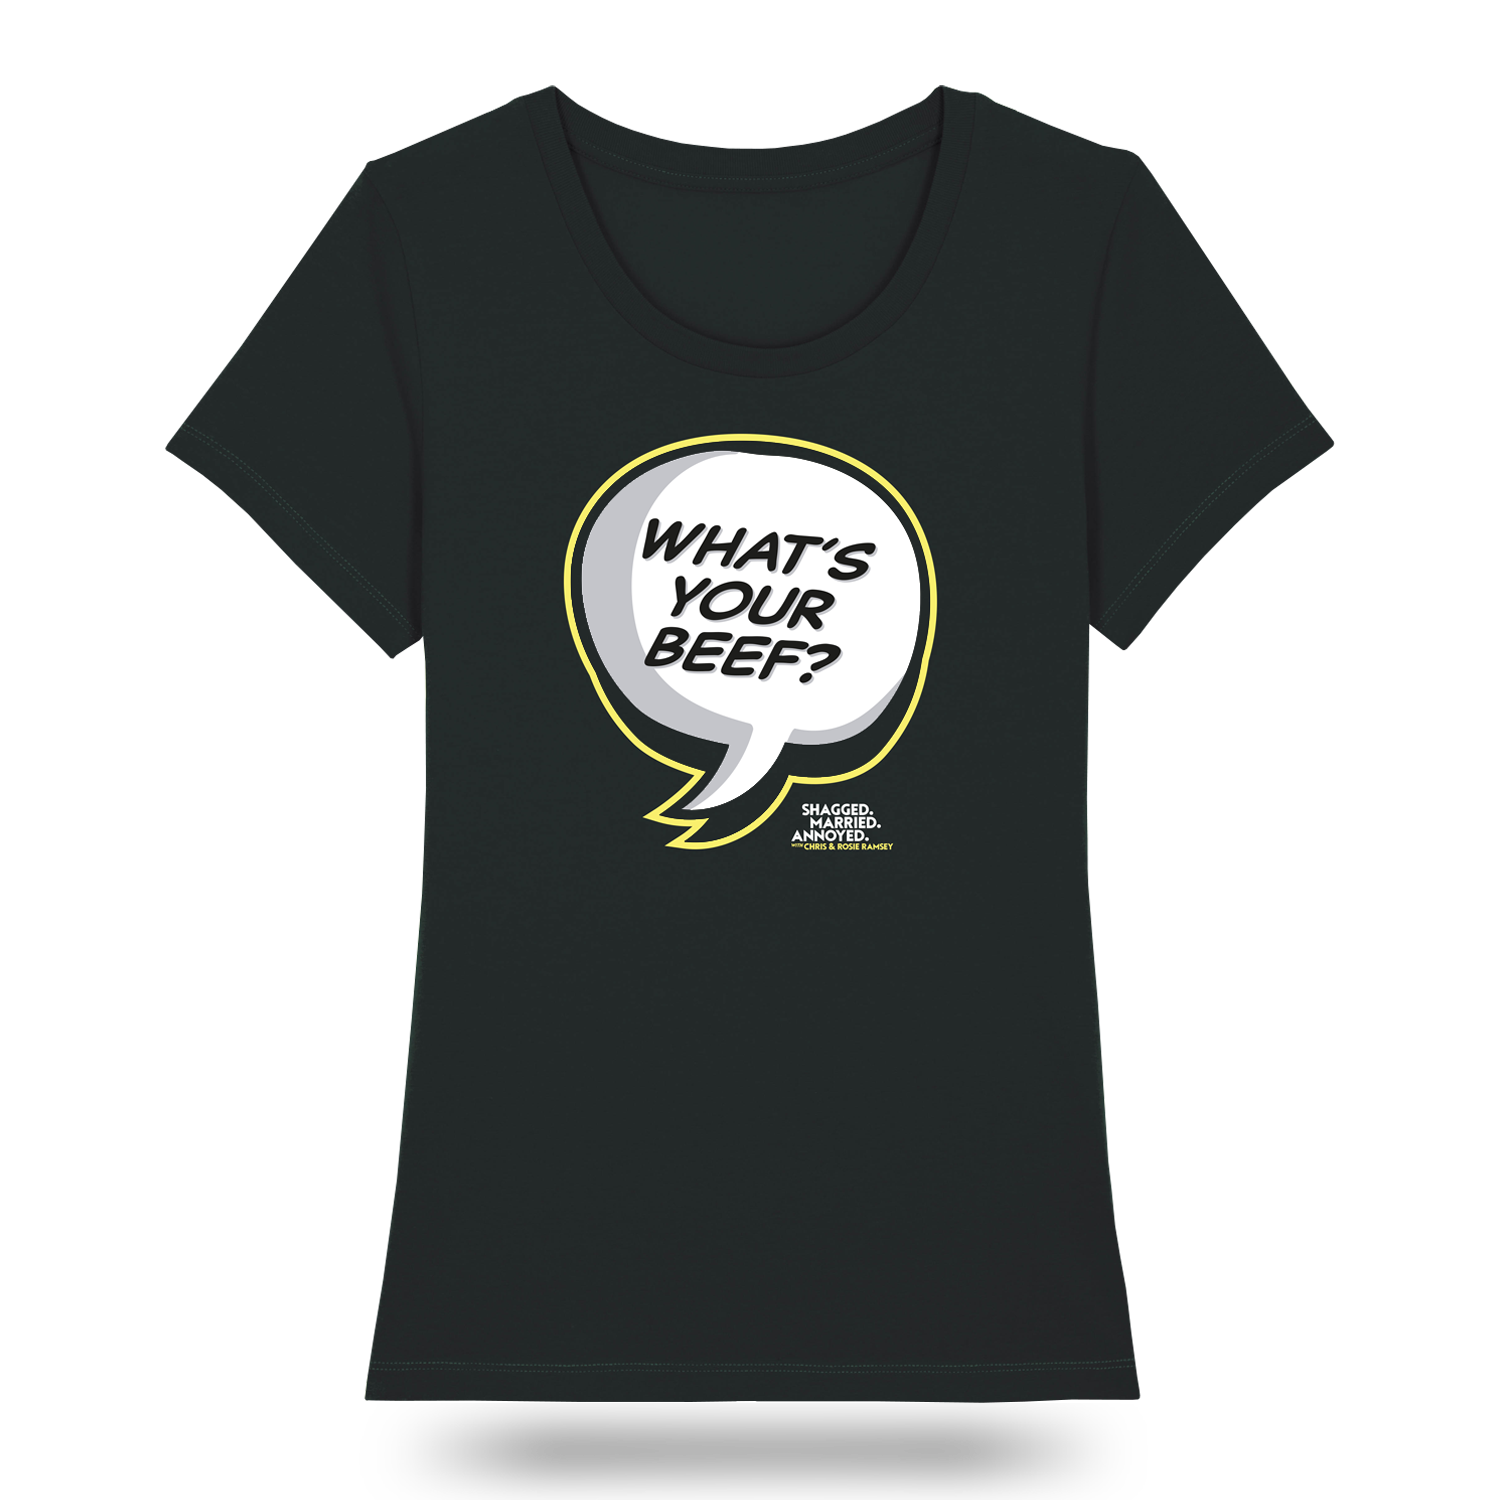 What's your Beef? Women's T-Shirt